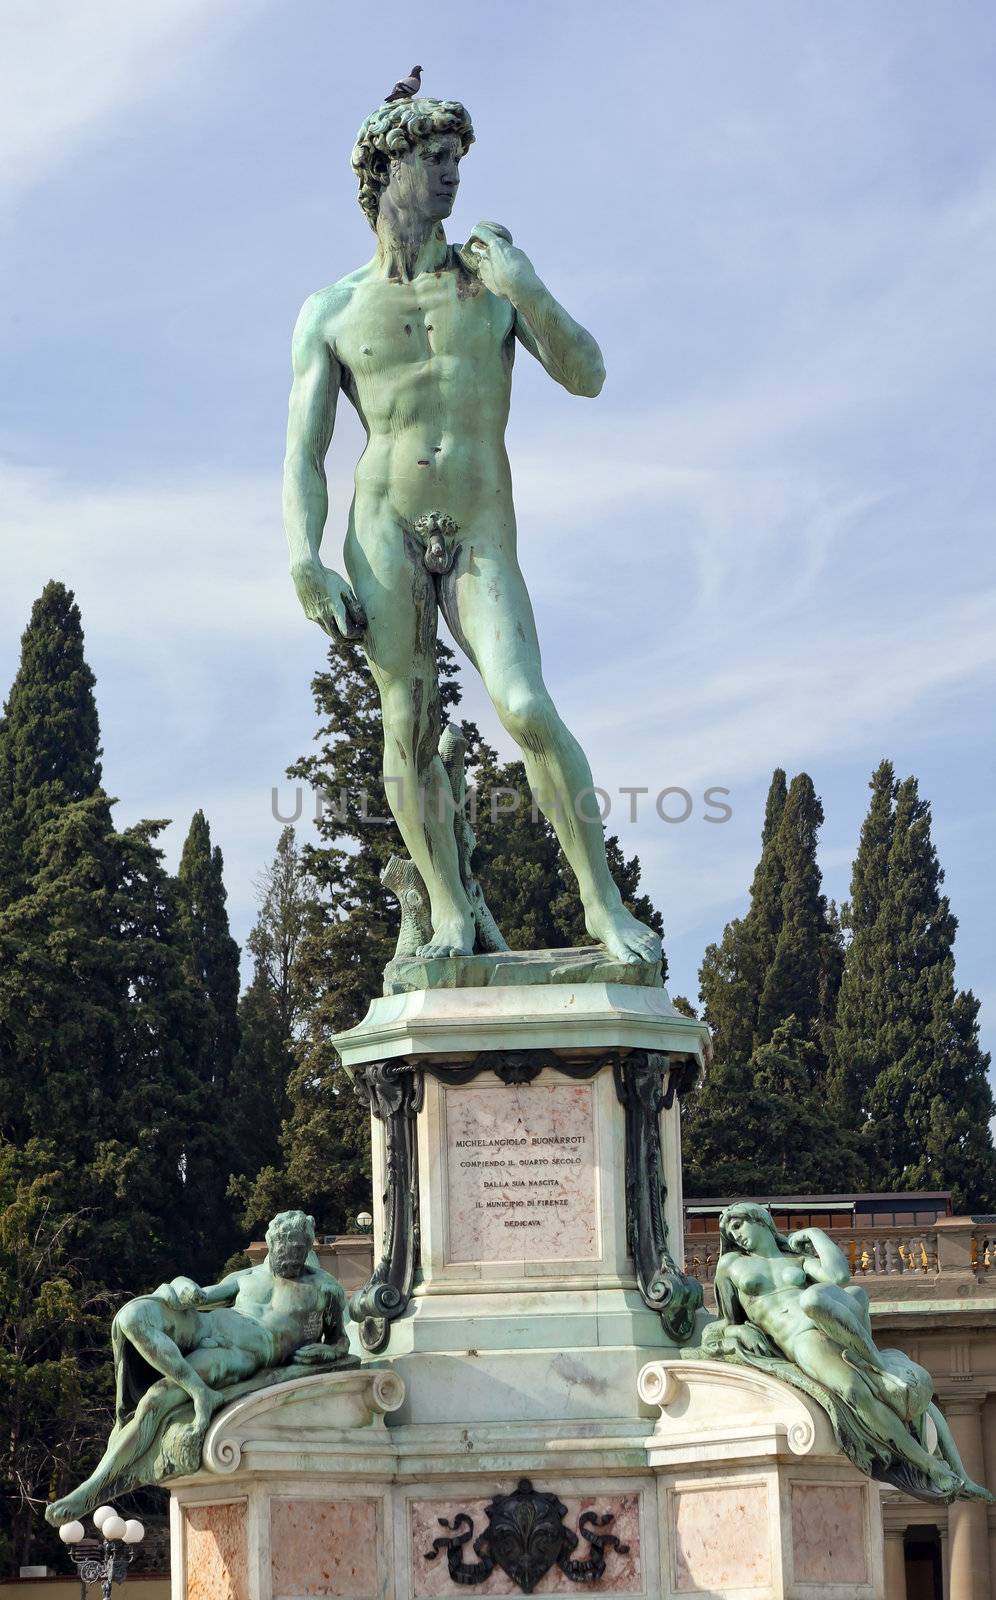 Monument to Michelangelo Copies of David, Day, Night, Dame and Dusk Florence Italy Cast in 1875 Michelangelo Square, piazzale Michelangelo
No property release required as this sculpture was done in the 1800s.